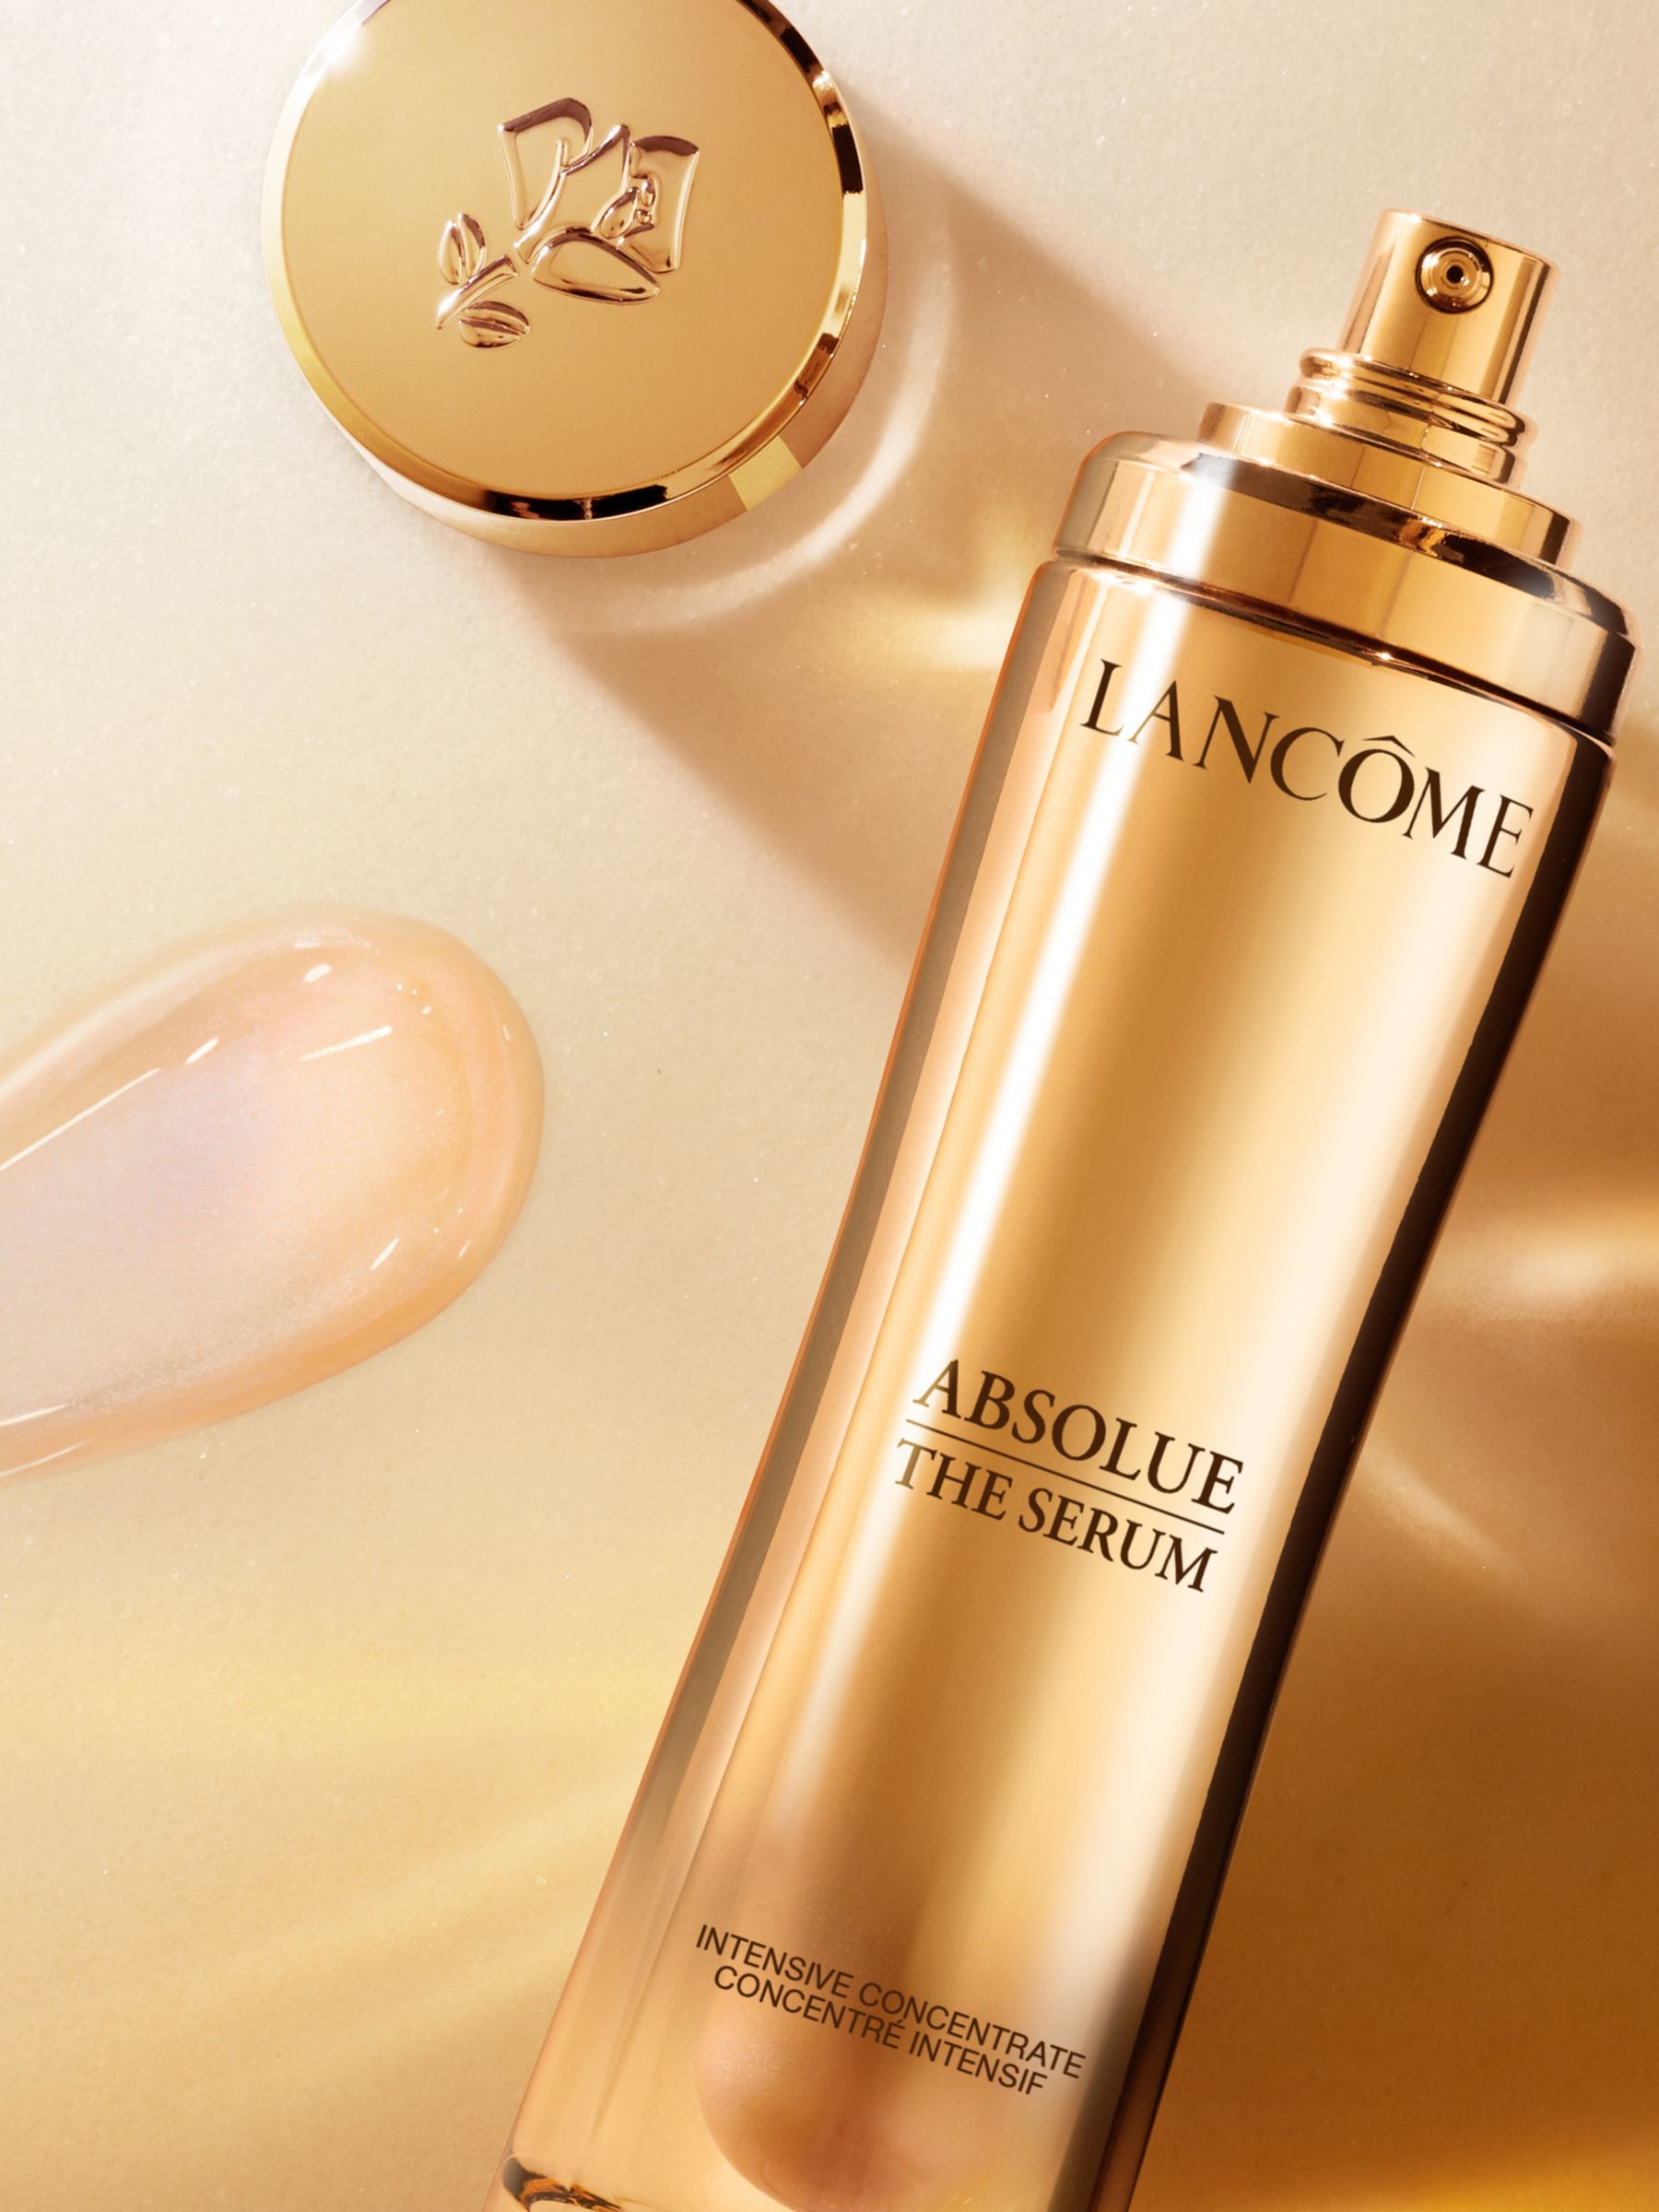 Lancôme Absolue The Serum Intensive Concentrate, Refill, 30ml 3